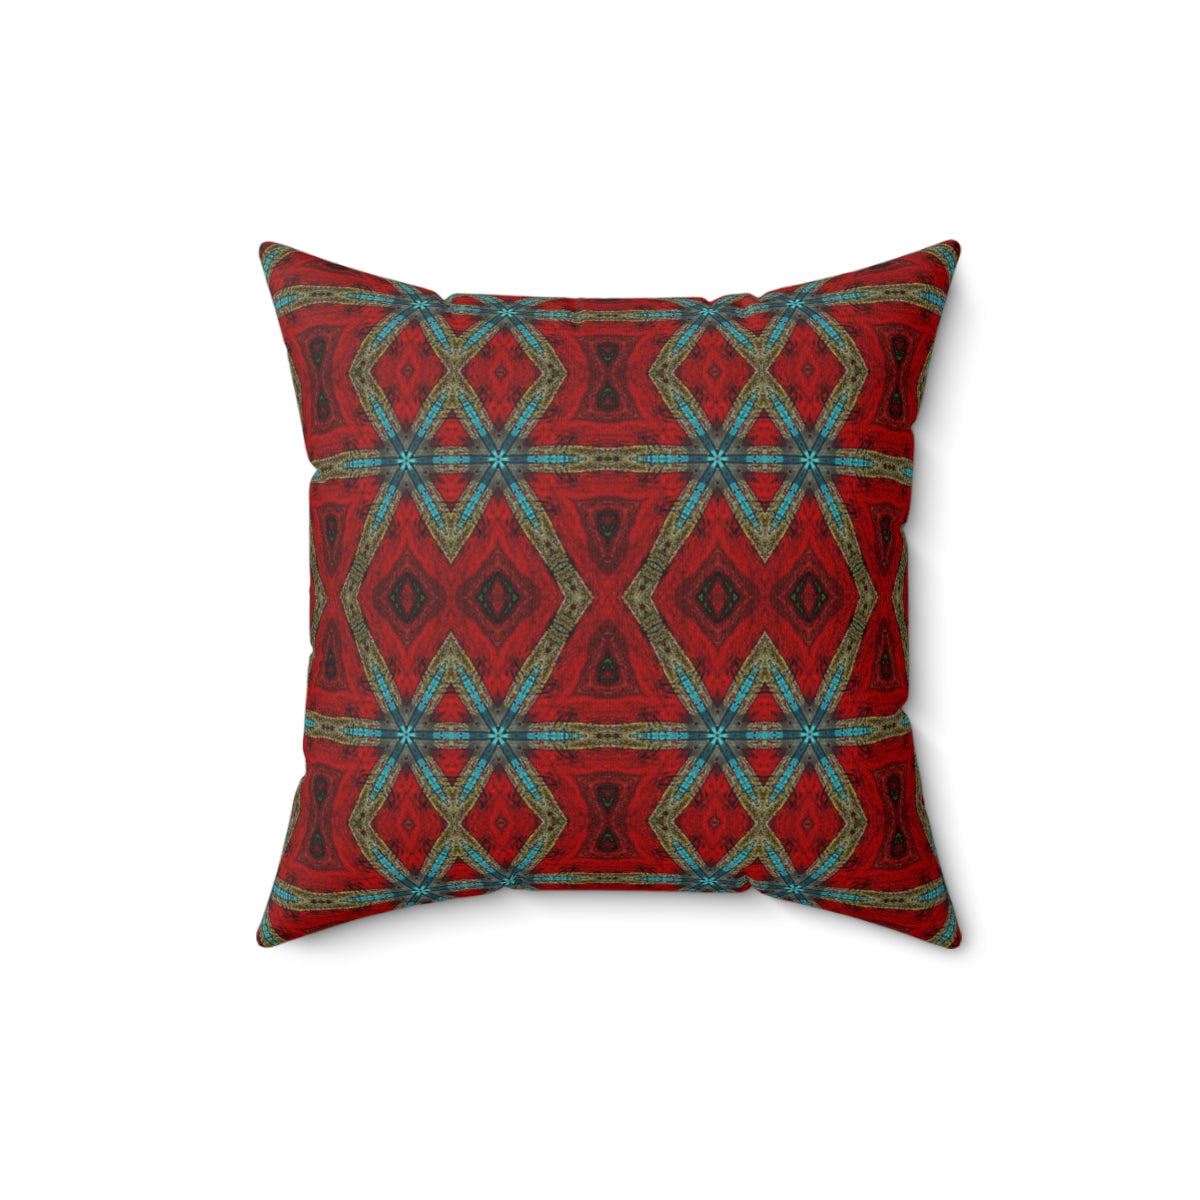 red decor pillows for the couch